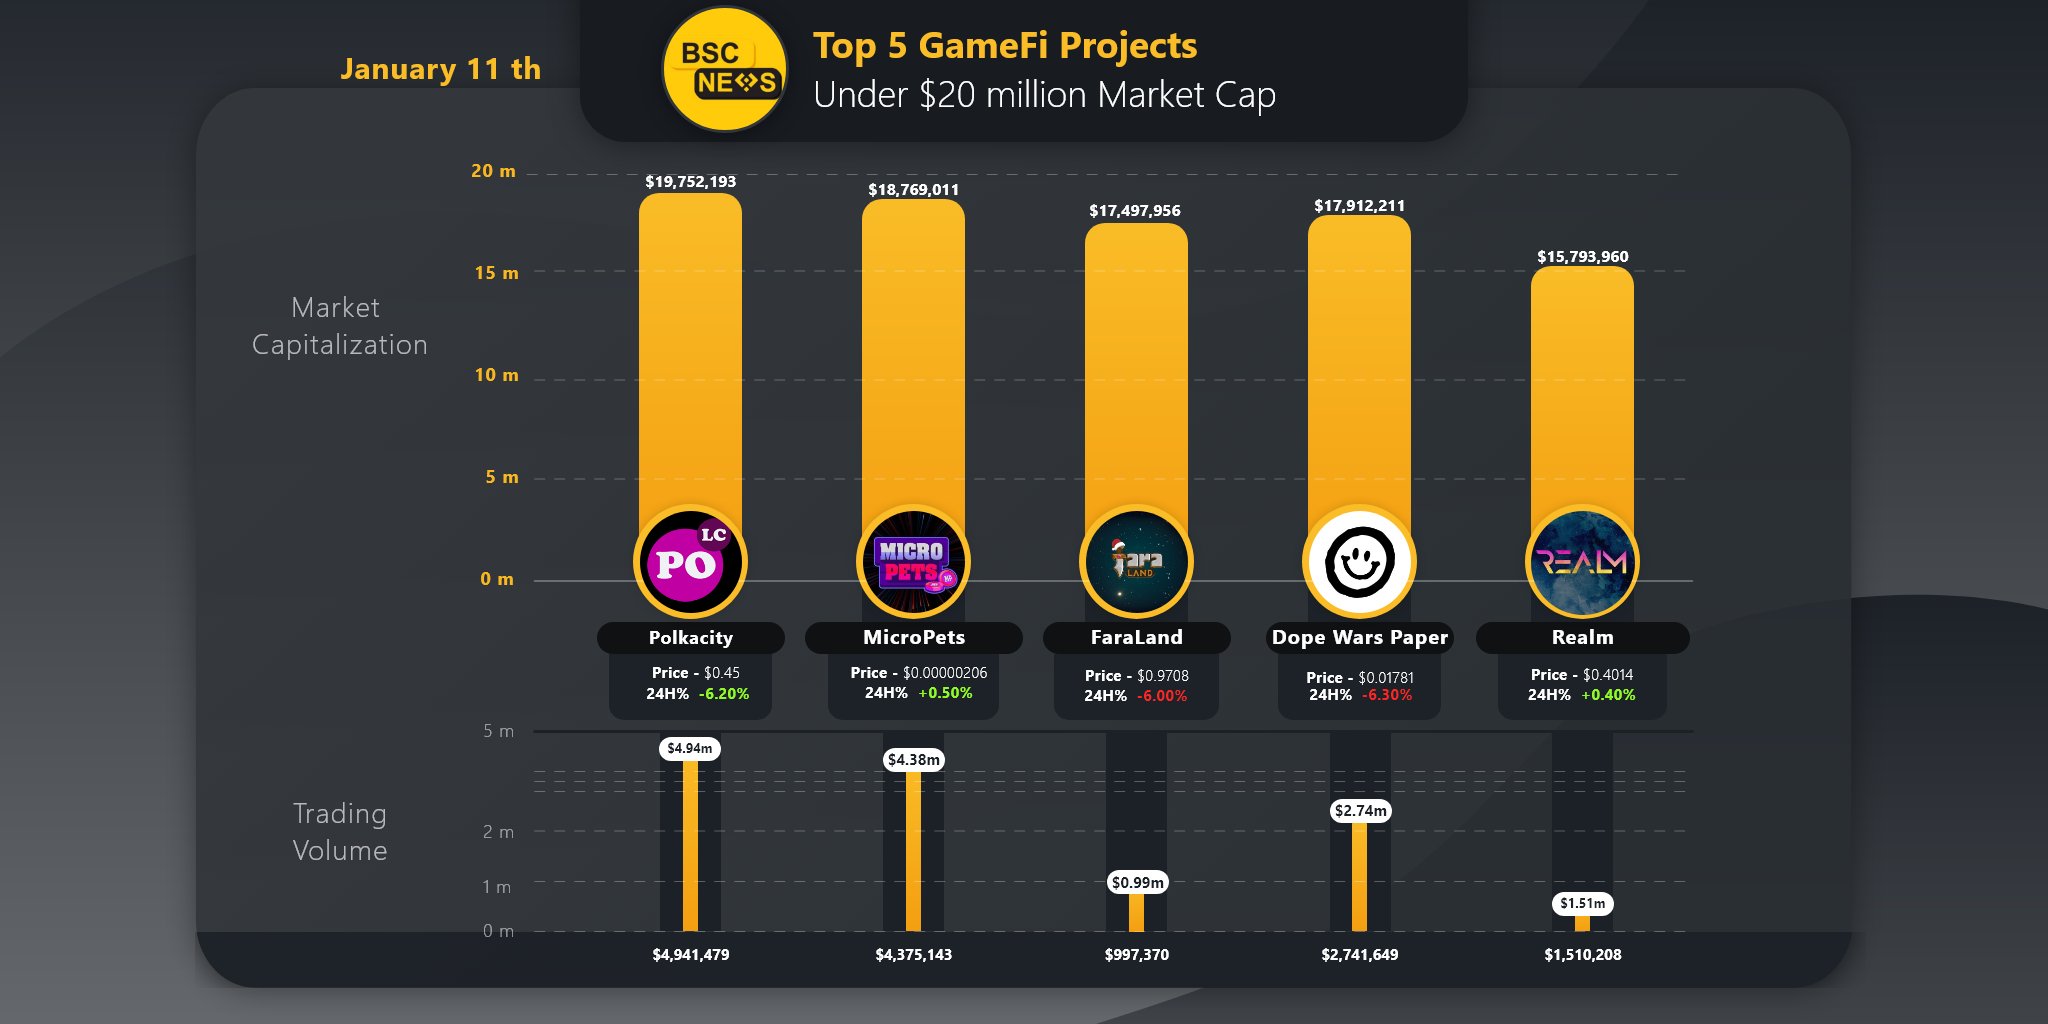 RT news_of_bsc: Gaming development takes time, and these projects are focused to make their name in the space.  Here are the top 5 #GameFi projects under 20M market cap  @PolkaCity @MicroPetsBSC @faraland_io @TheDopeWars @Enter_Realm [twitter.com] [pbs.twimg.com]